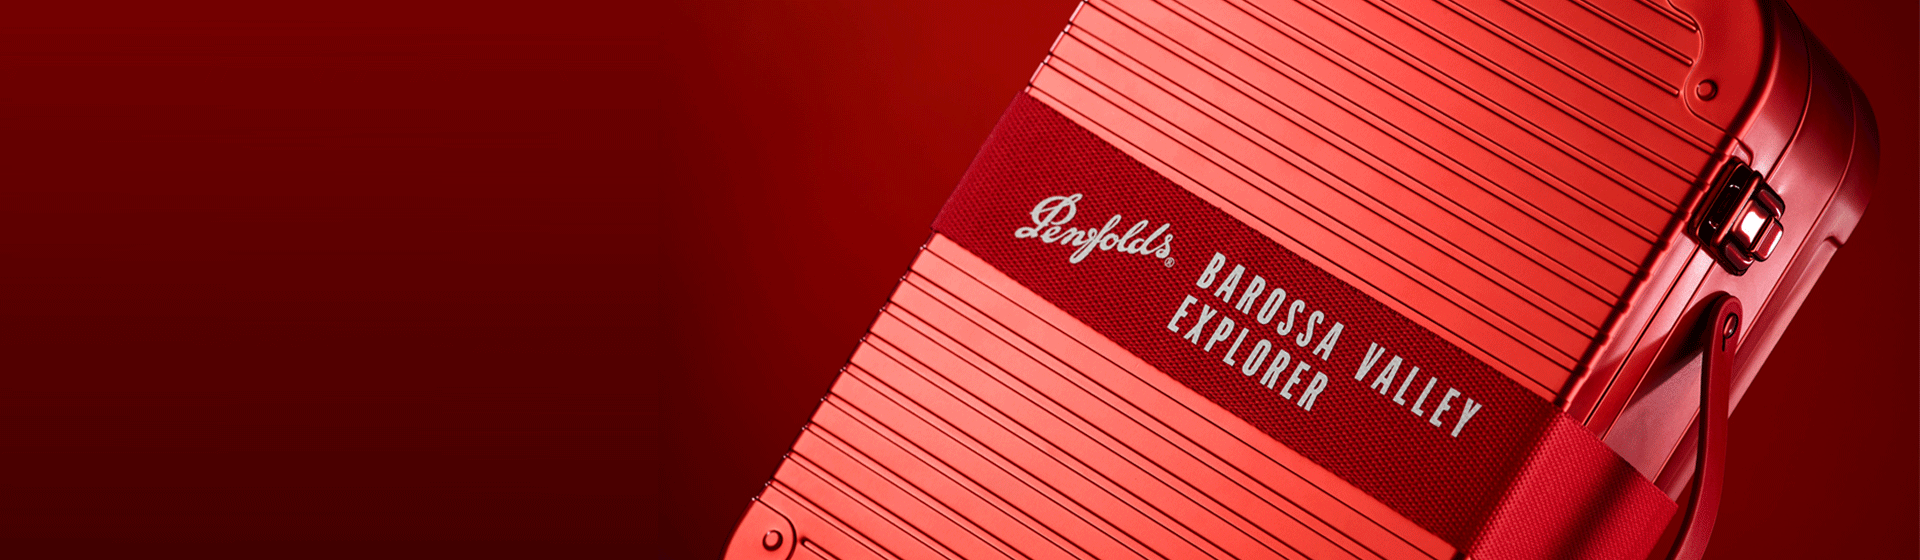 Close up of red luggage tin with material belt close against red background. 'Penfolds Barossa Valley Explorer' is written across the belt